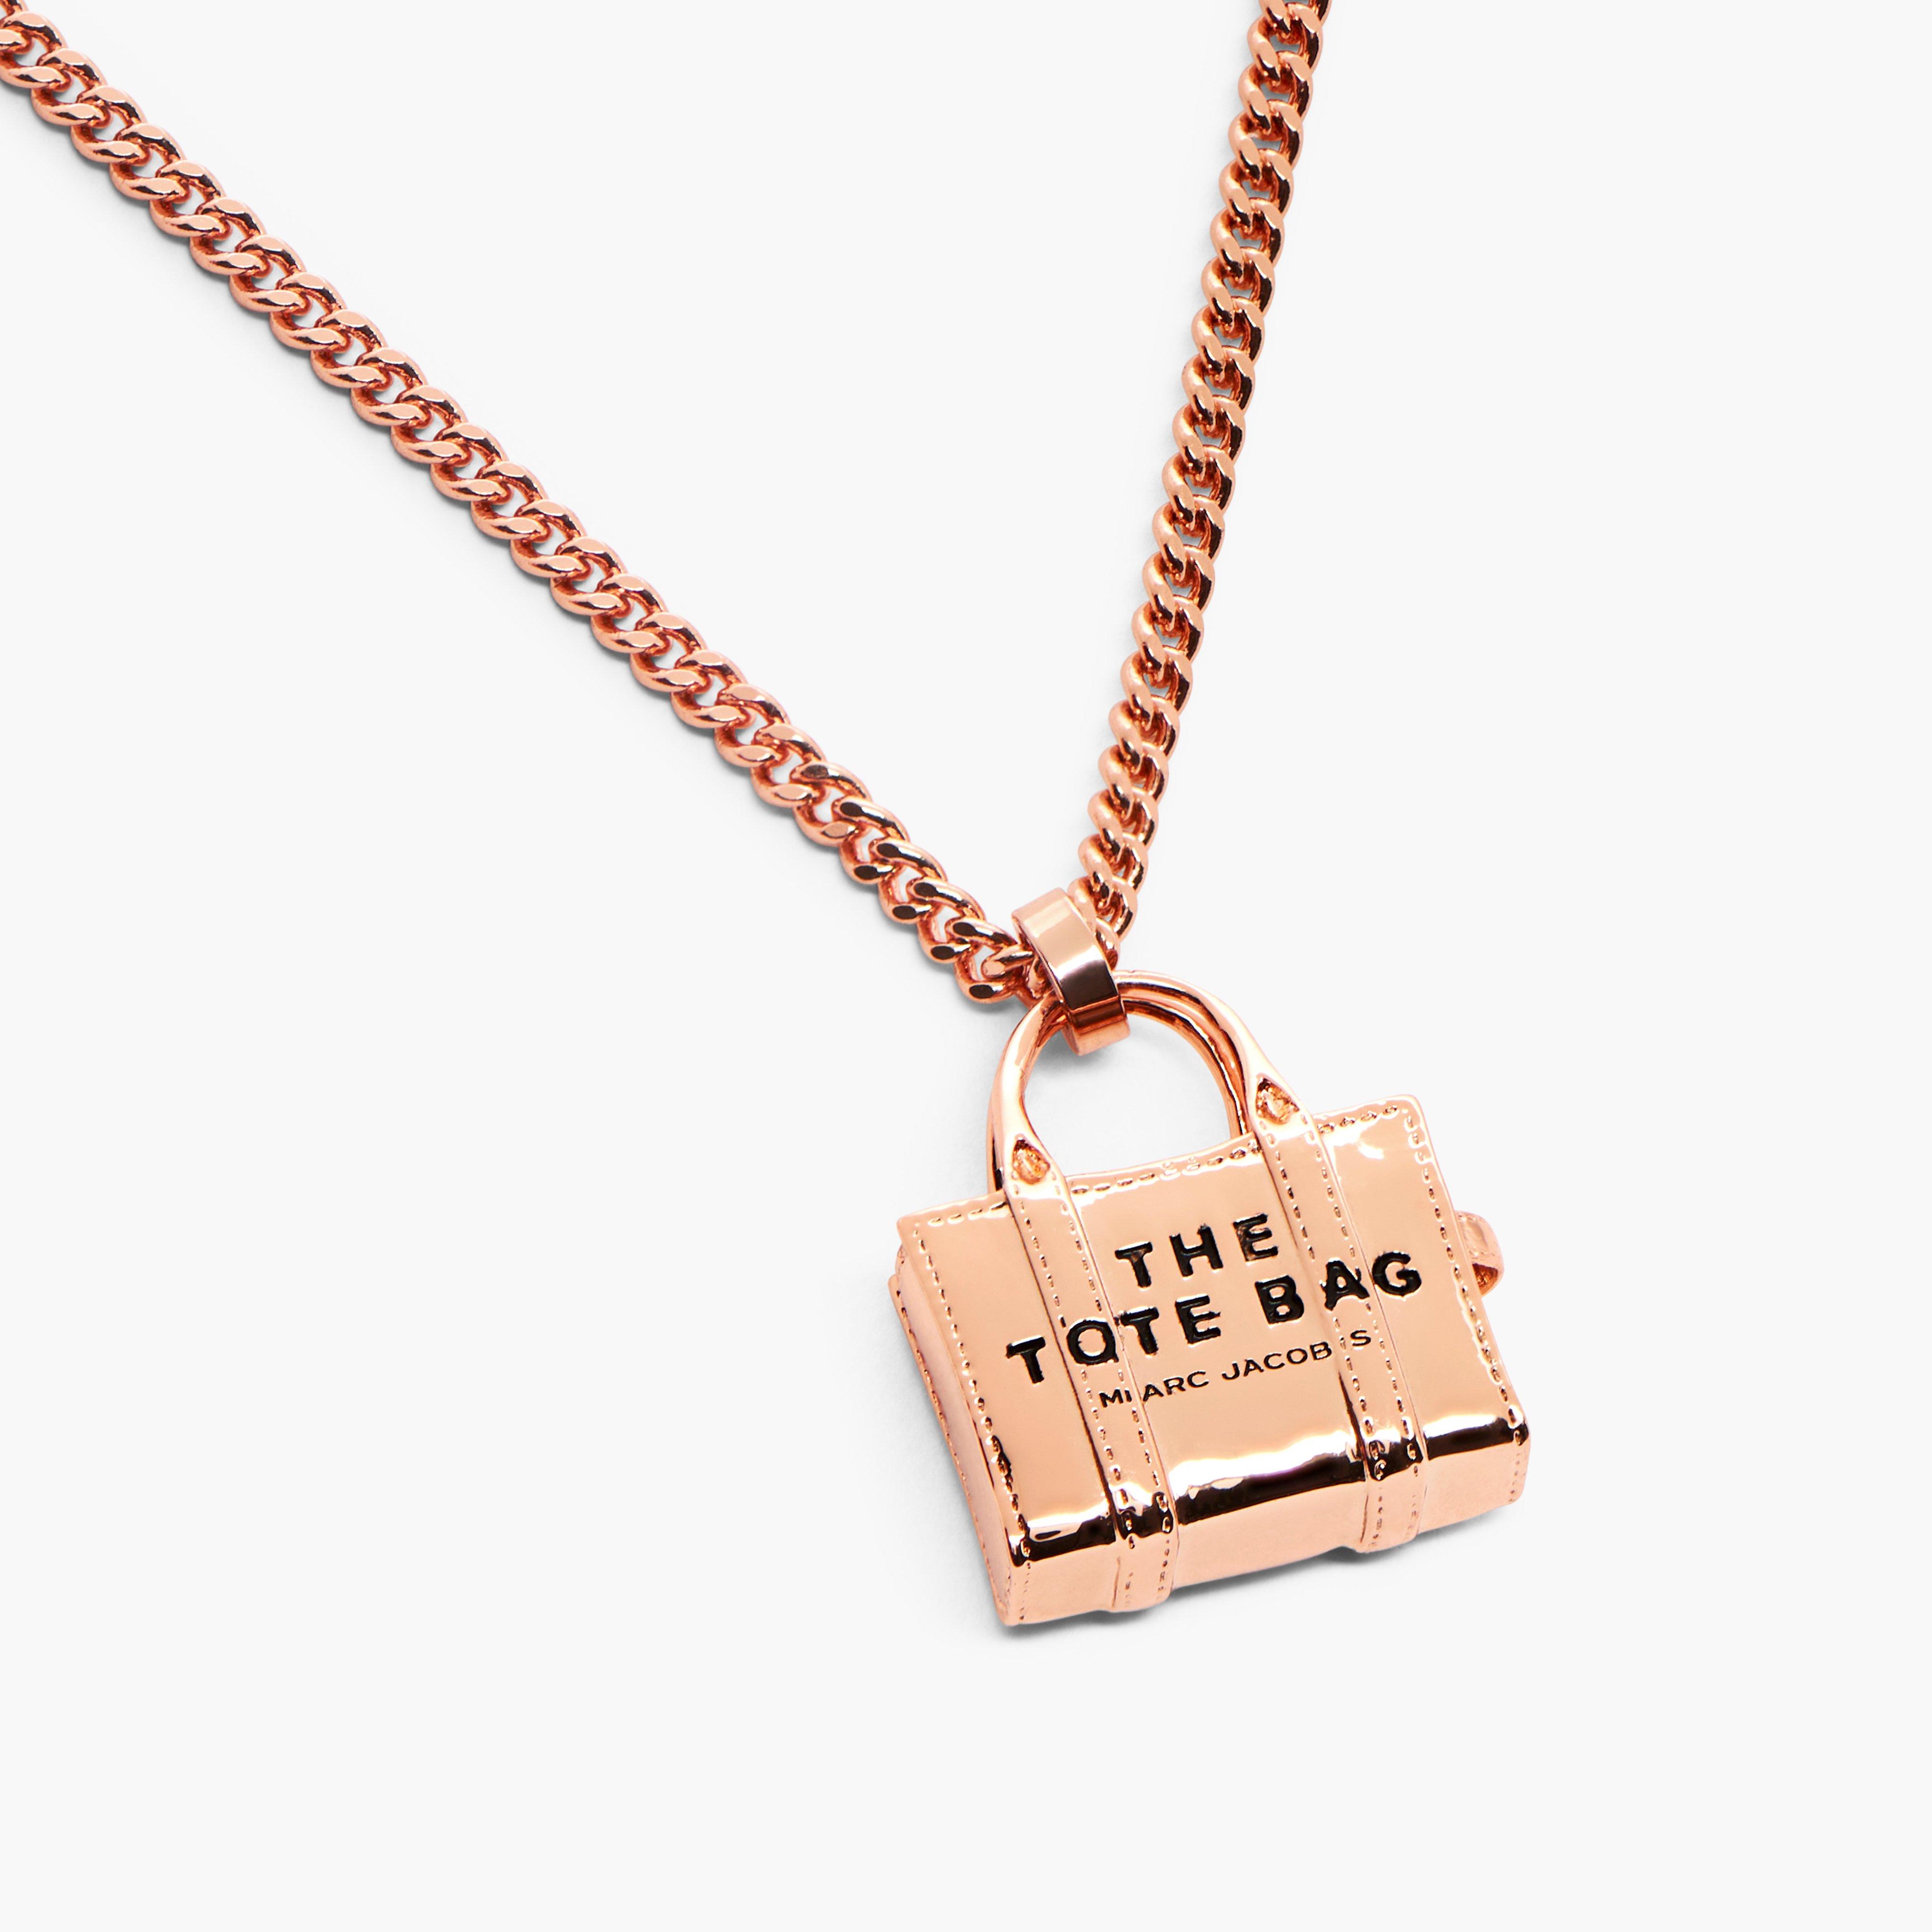 Marc by Marc jacobs The Tote Bag Necklace,ANTIQUE ROSE GOLD